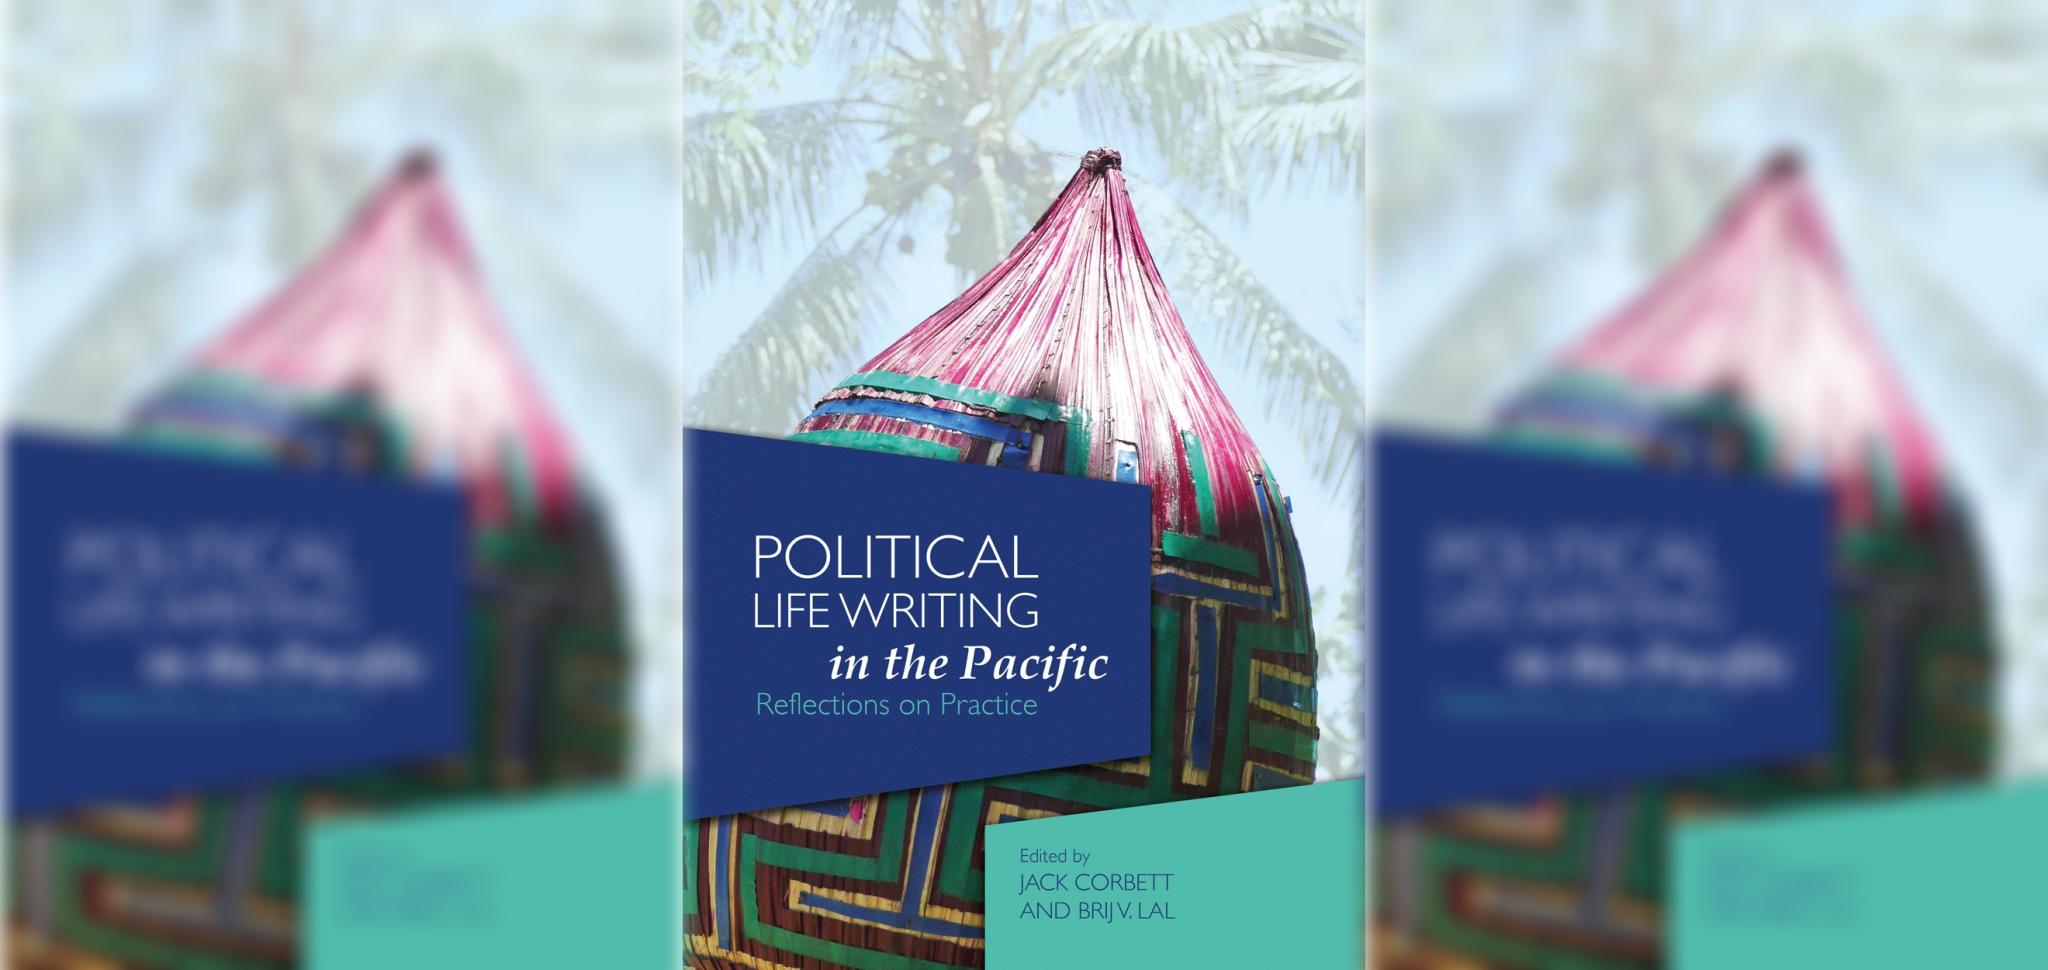 Political Life Writing in the Pacific Reflections on Practice